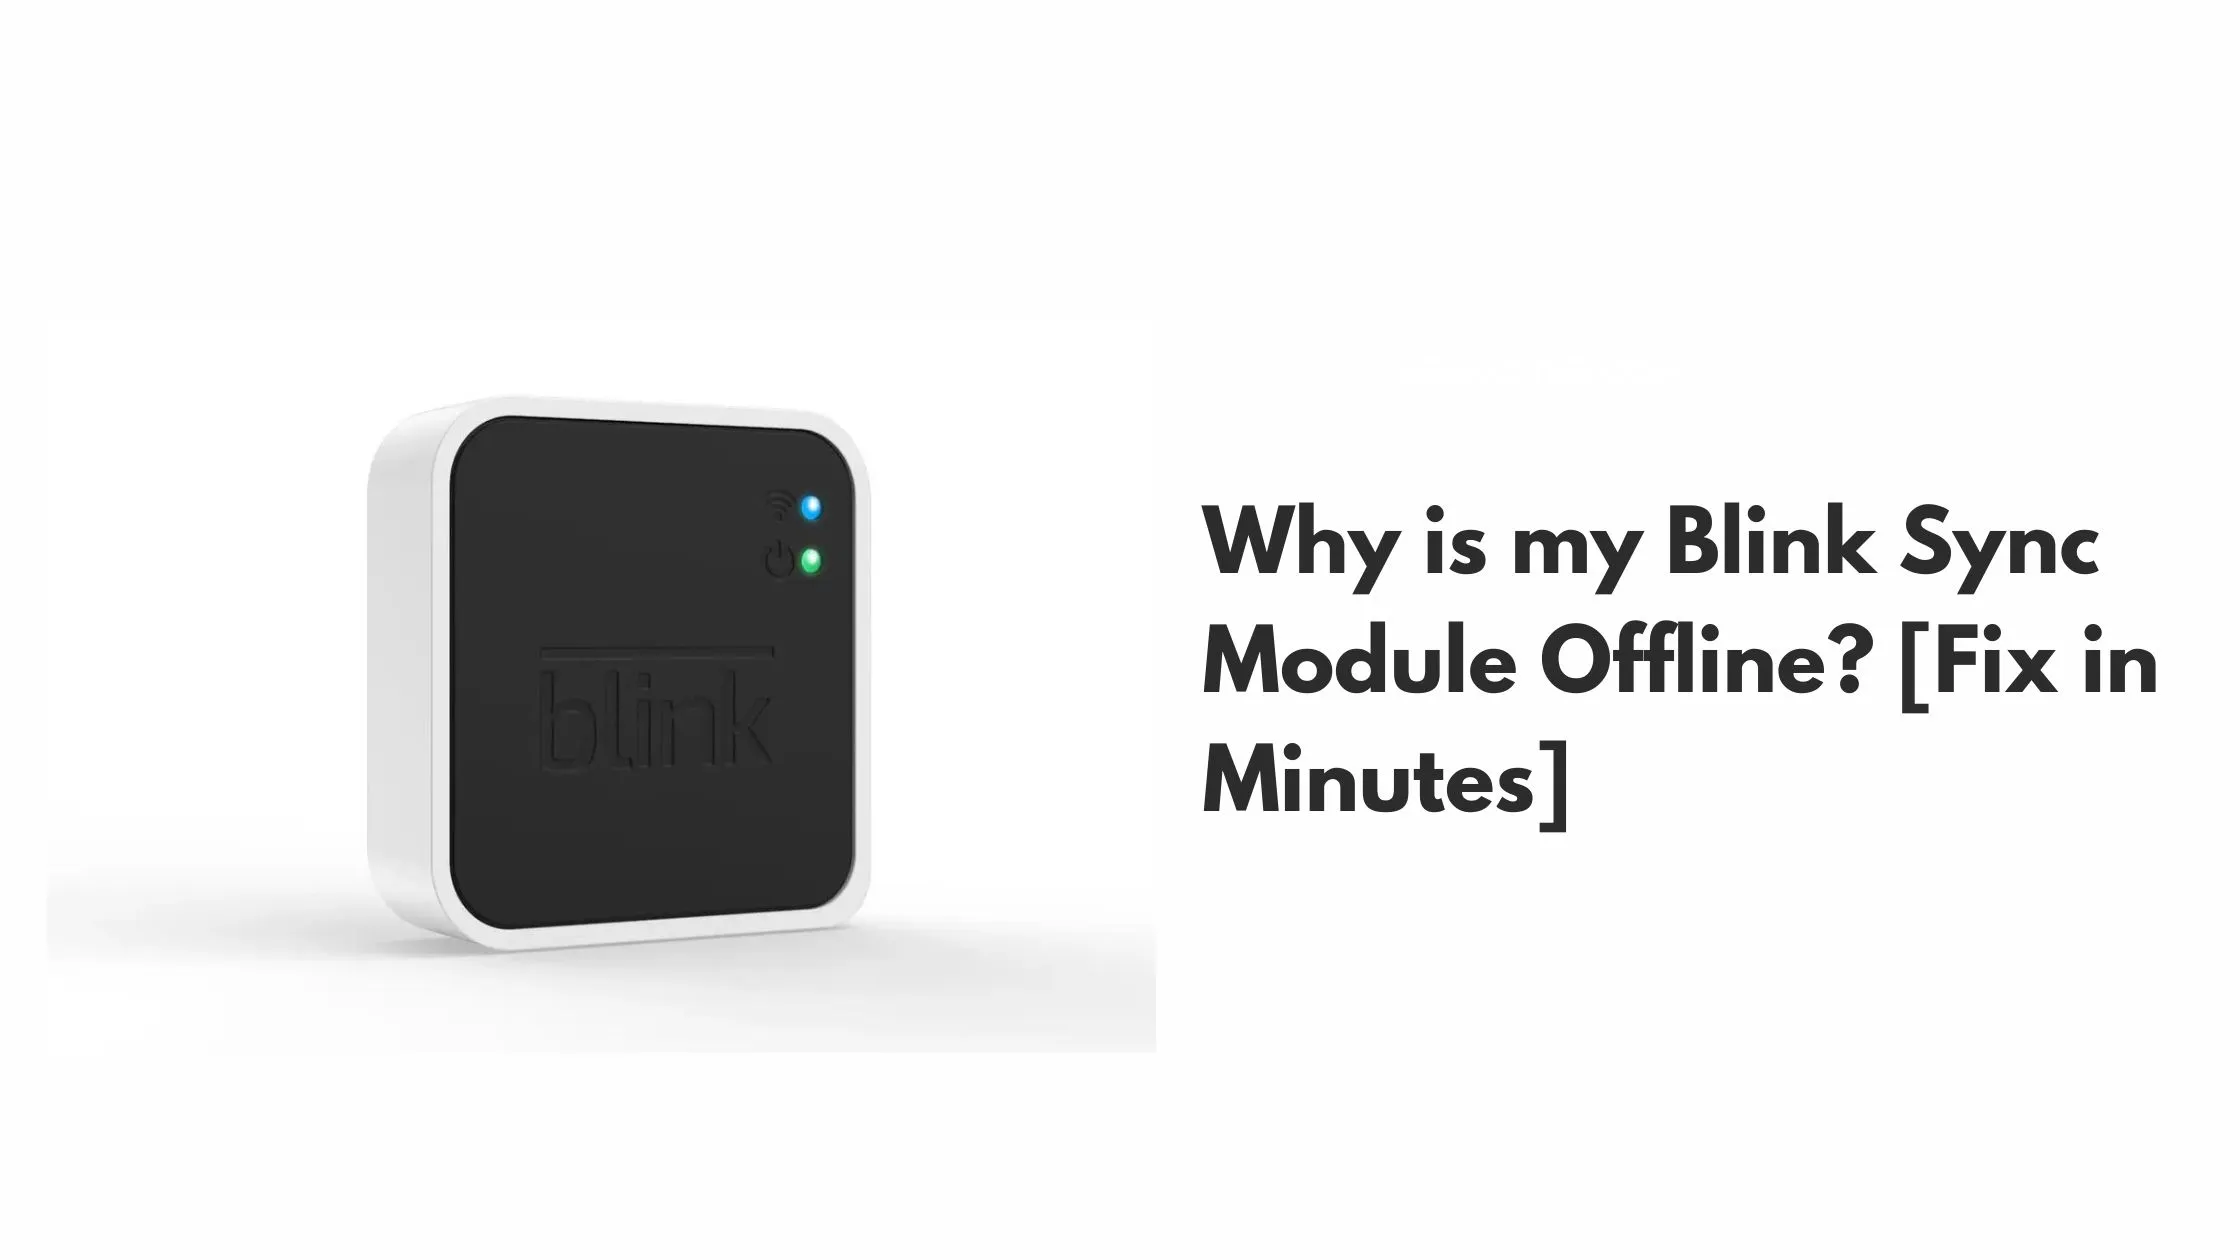 Why is my Blink Sync Module Offline? [Fix in Minutes]